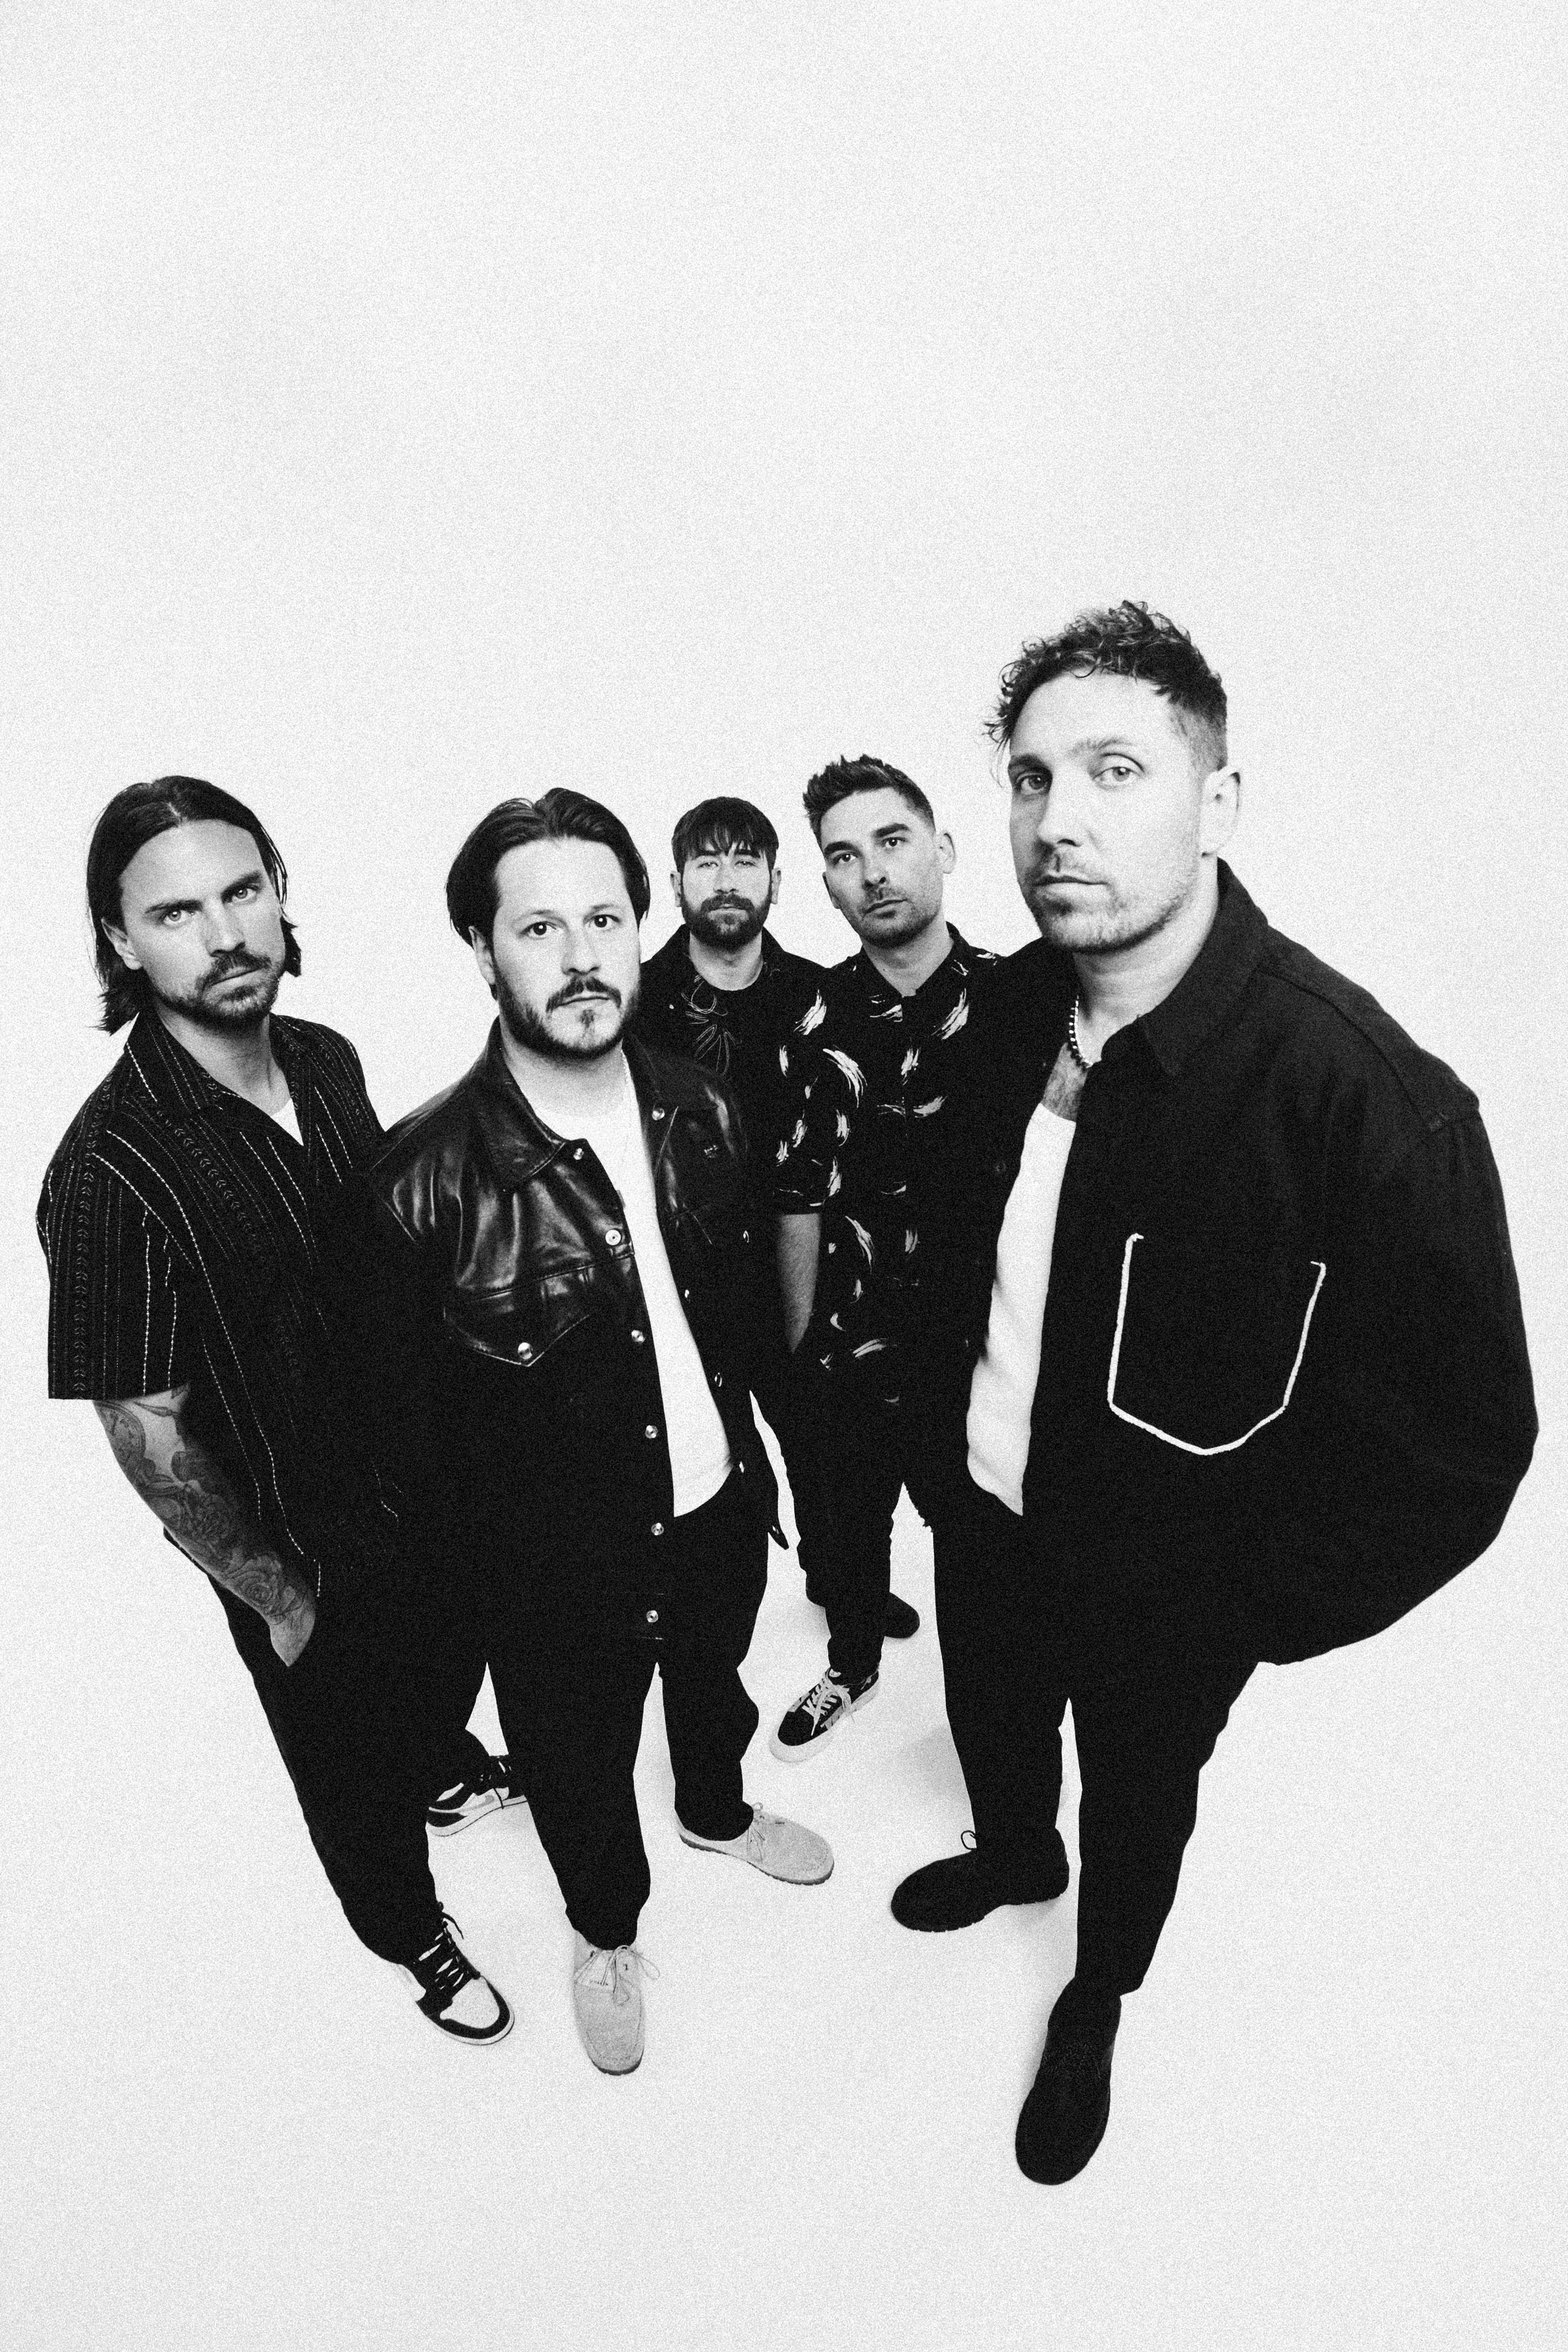 You Me At Six - the Final Nights of Six presale passcode